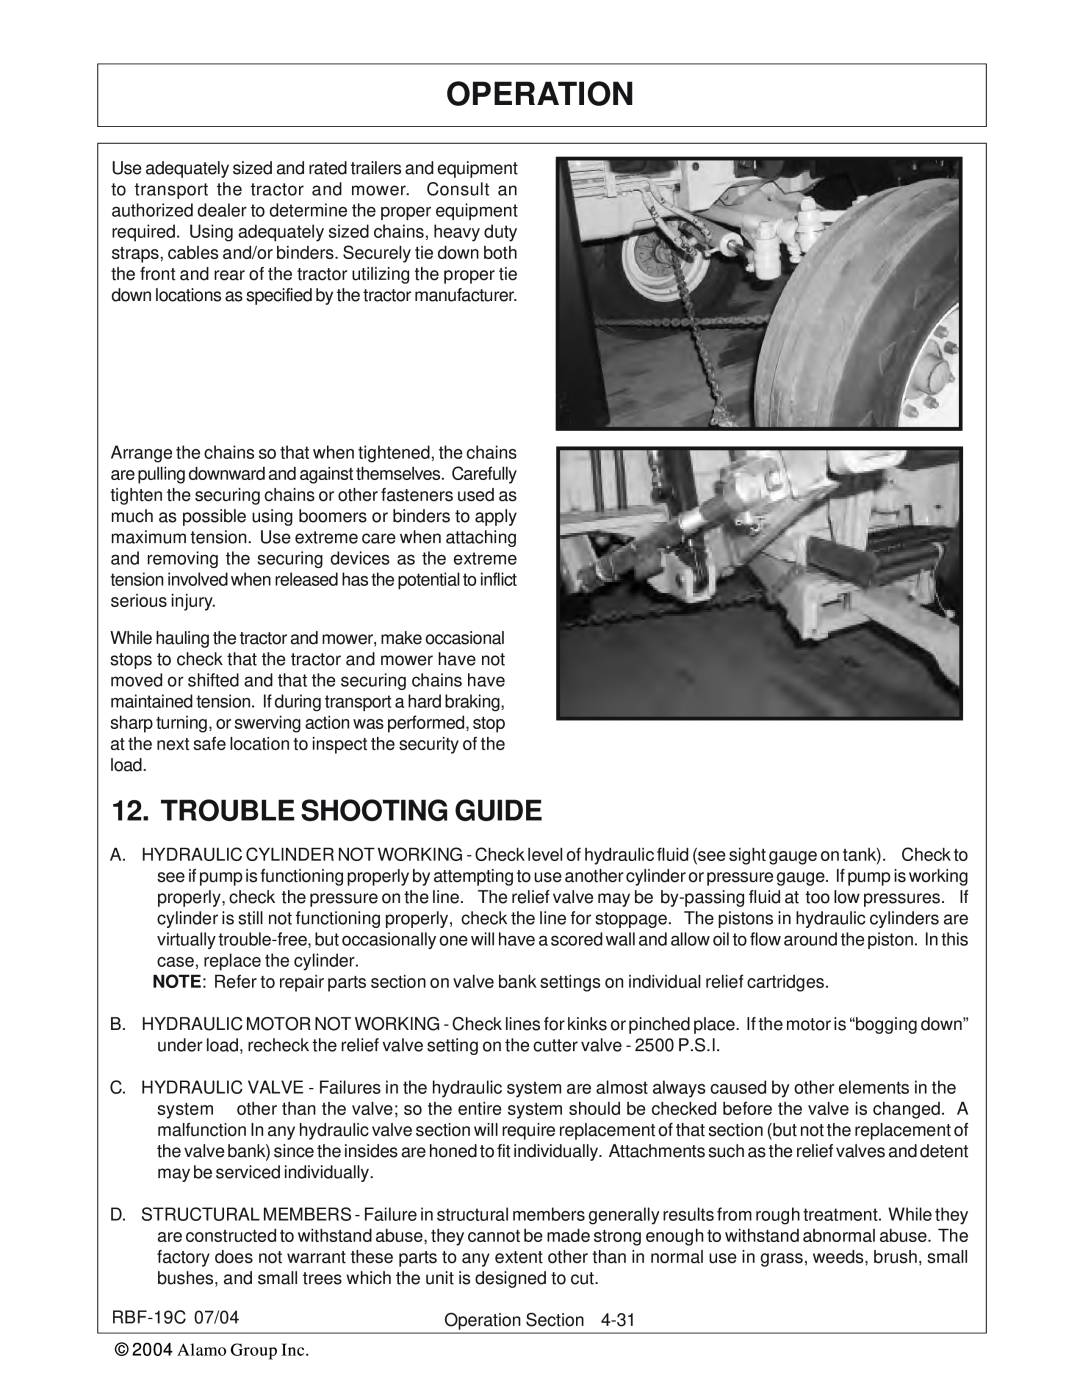 Tiger RBF-19C manual Trouble Shooting Guide, Operation 